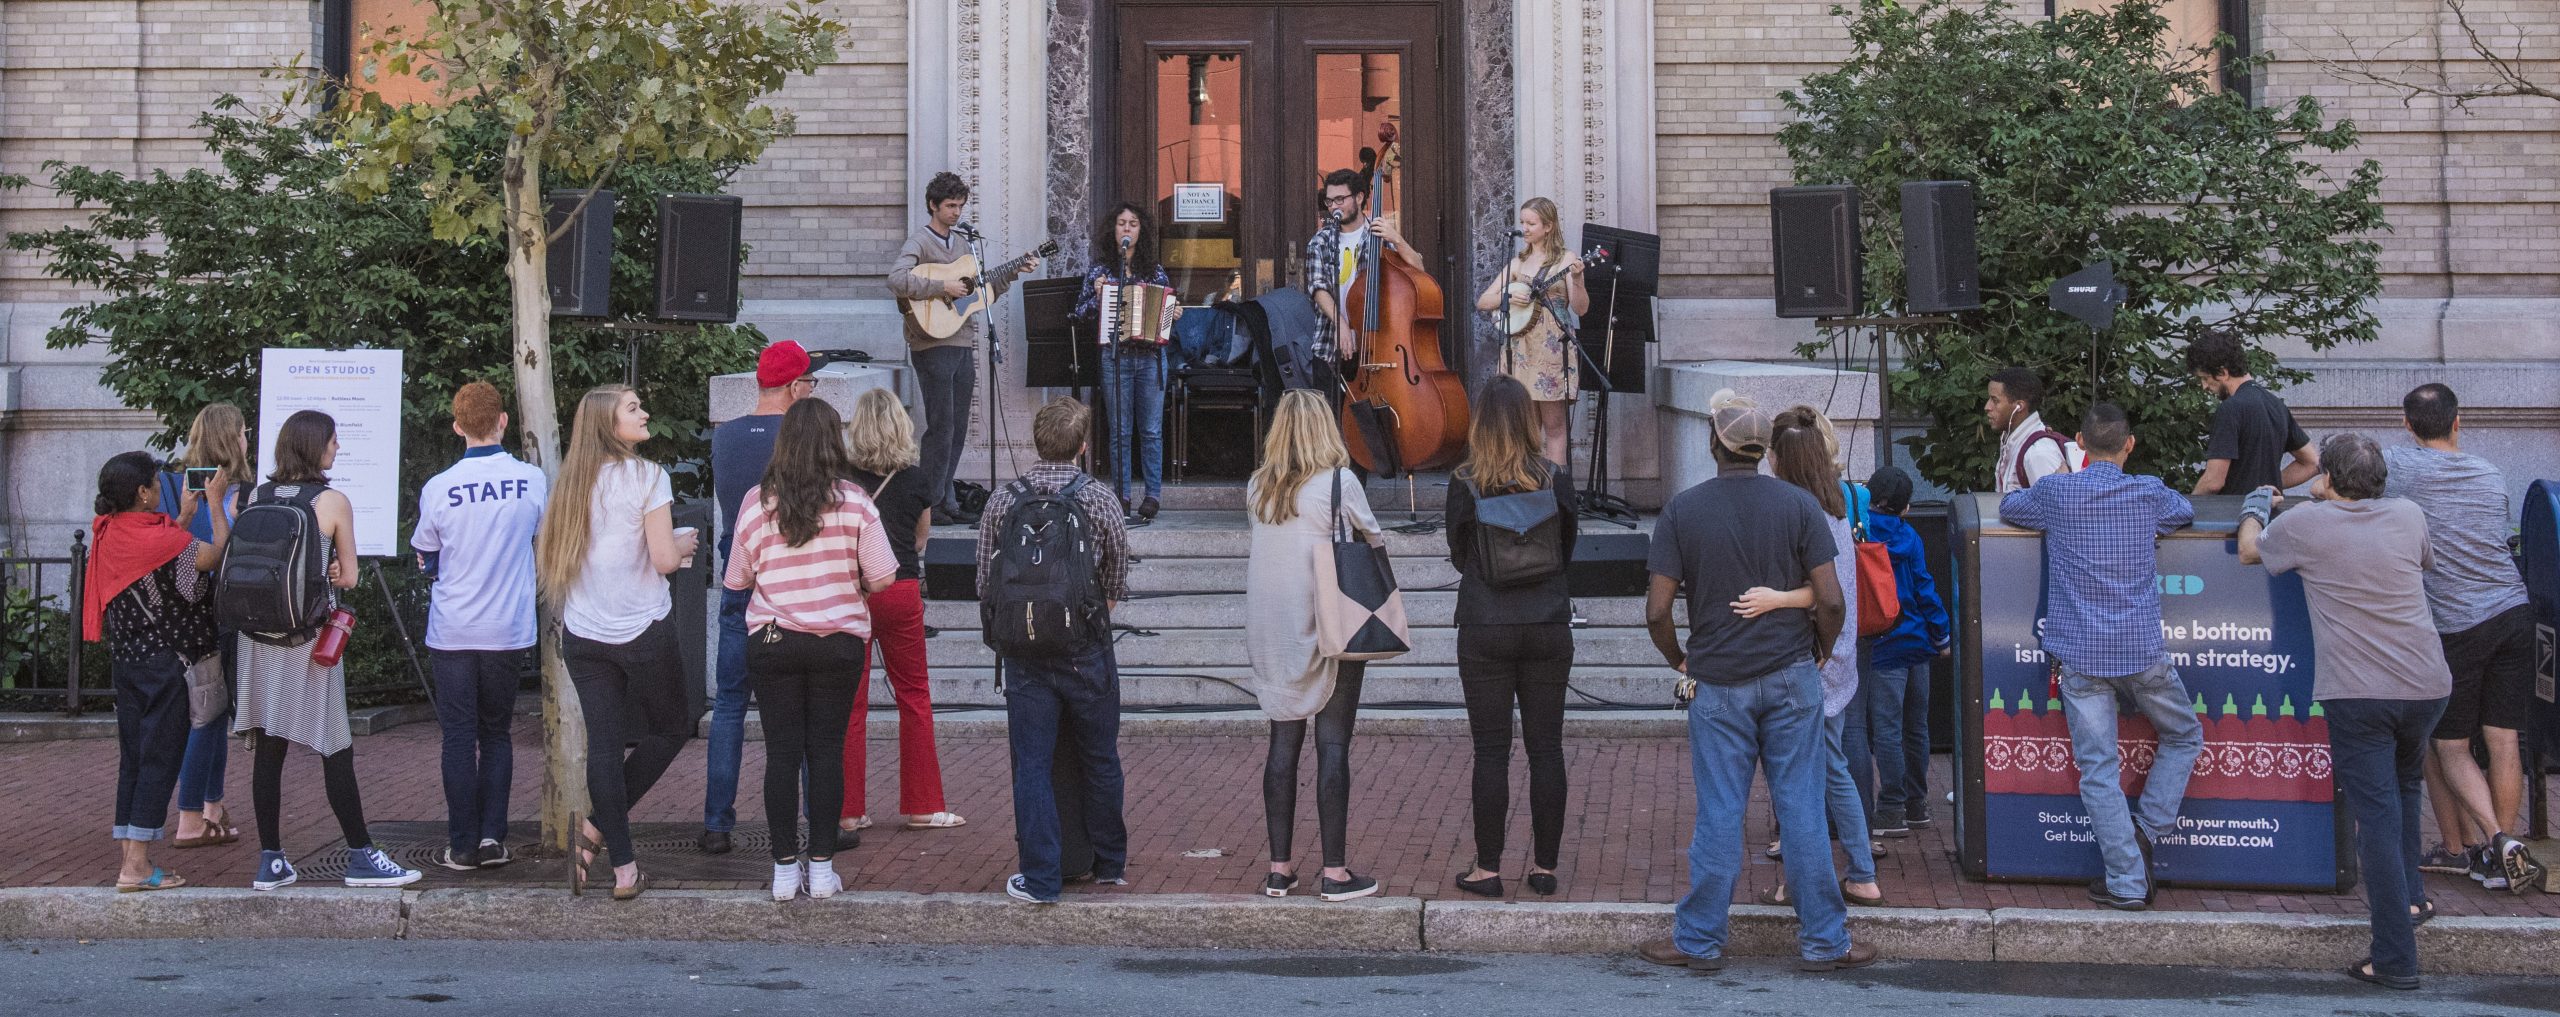 four musicians playing on the steps of a stone building, a line of spectators fills the sidewalk in from of them